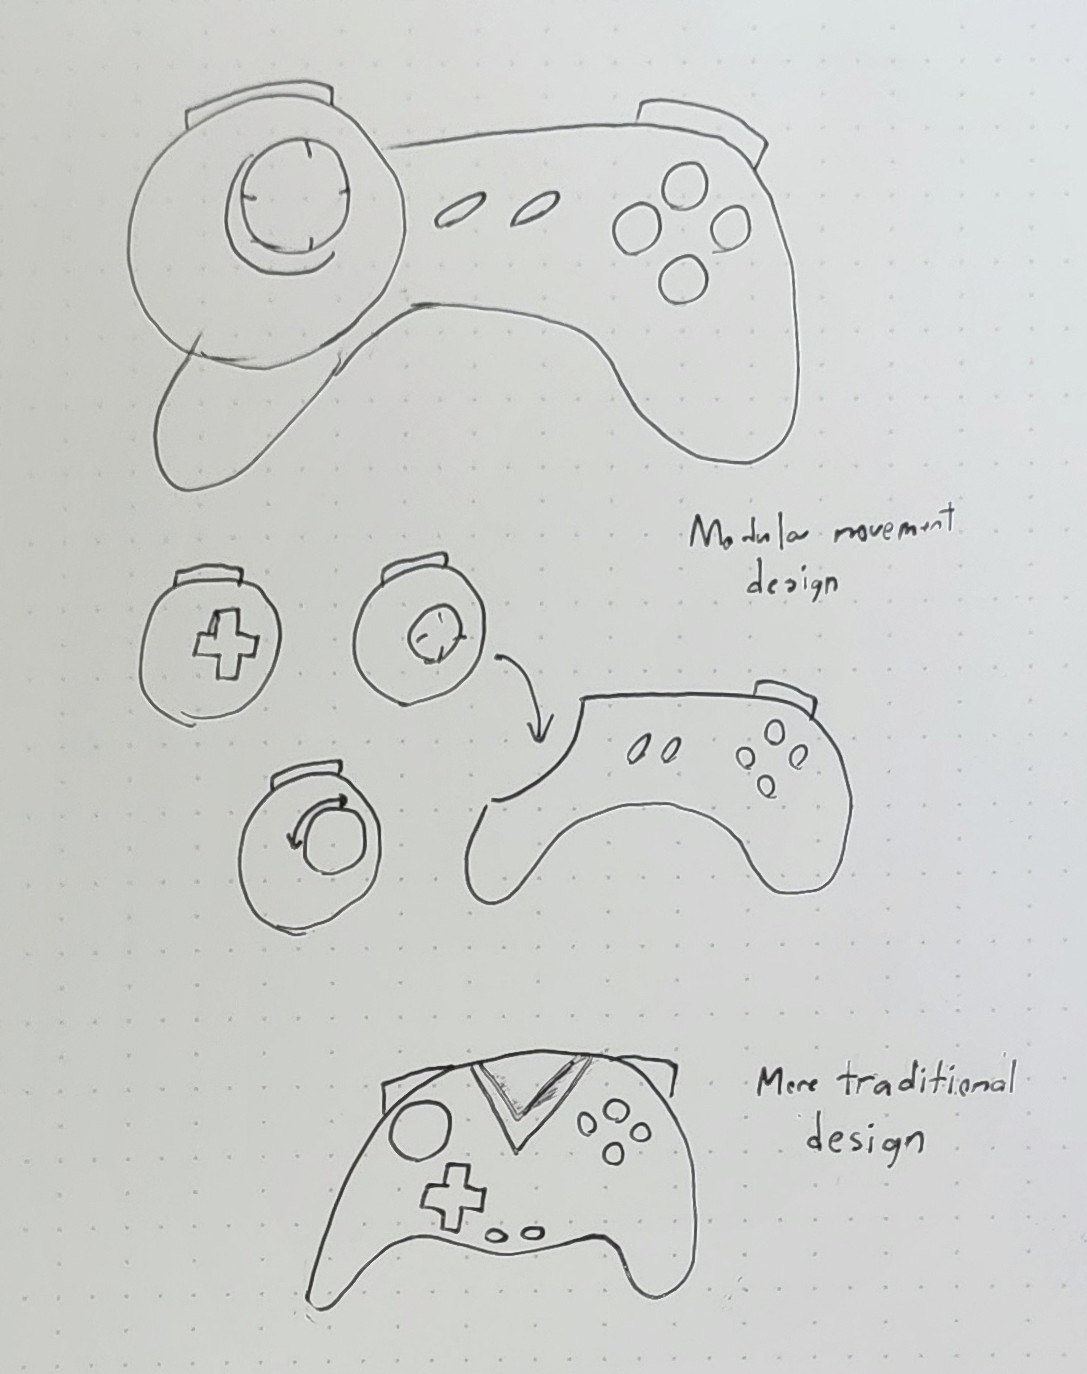 Some designs for a controller